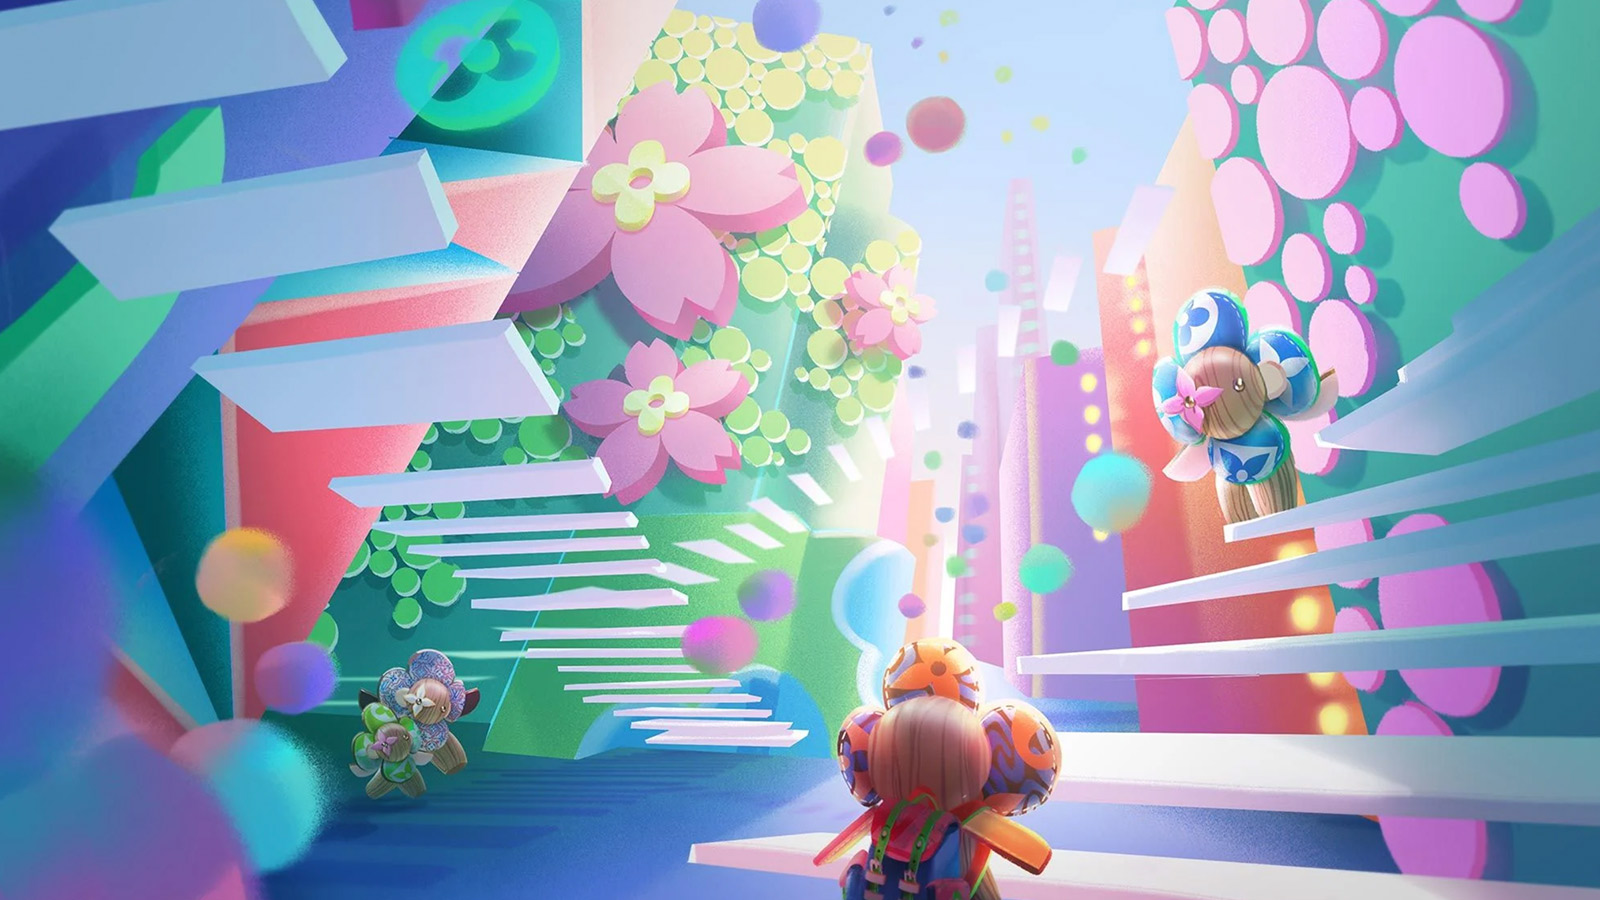 Louis Vuitton to launch NFT game with art work from Beeple